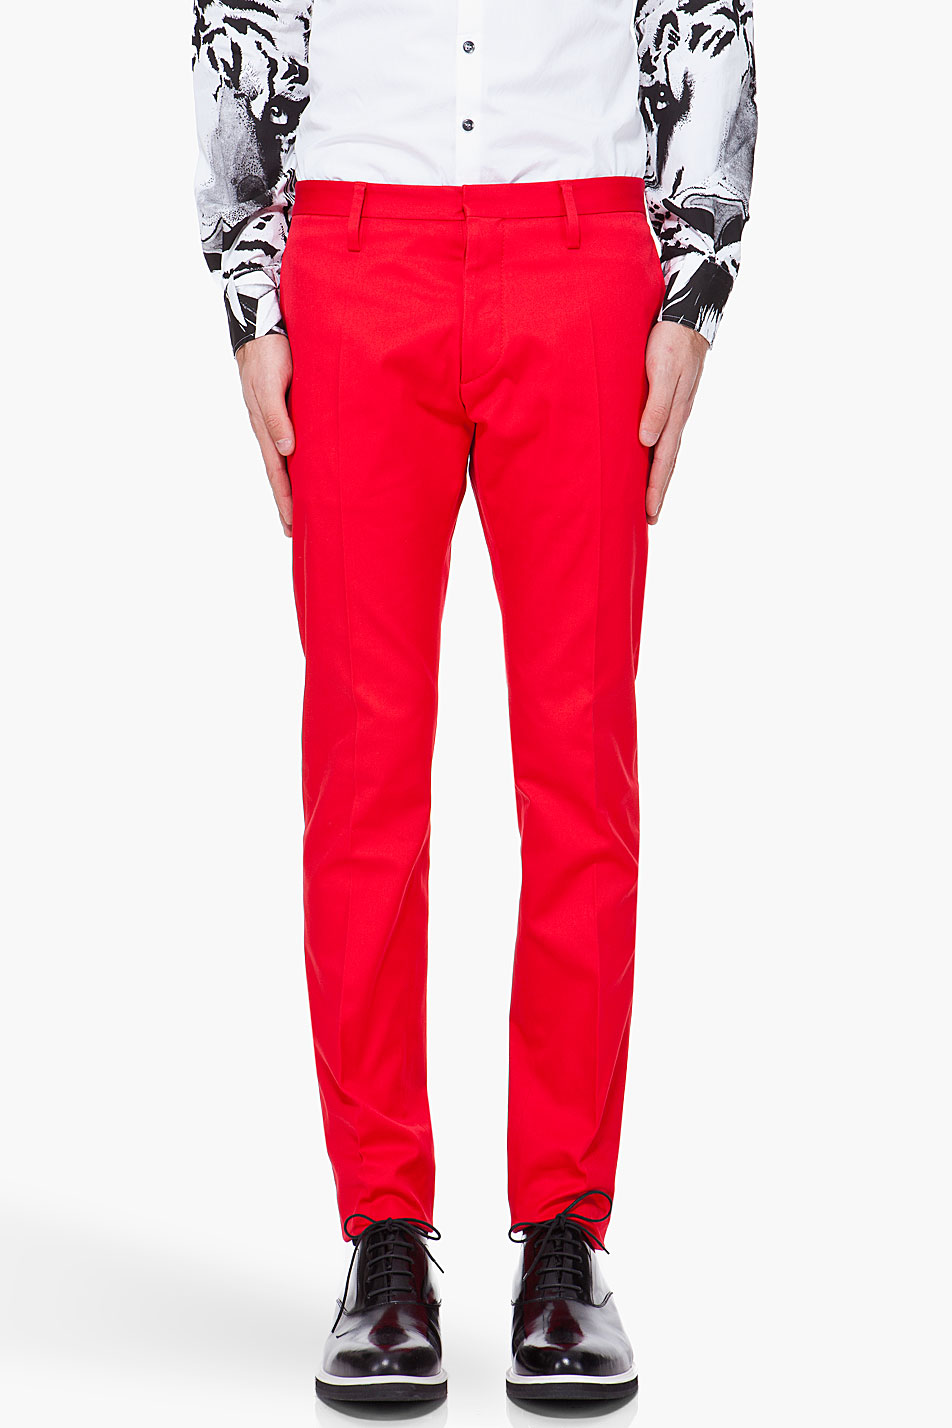 Dsquared² Red Glam Rock Pants in Red for Men | Lyst